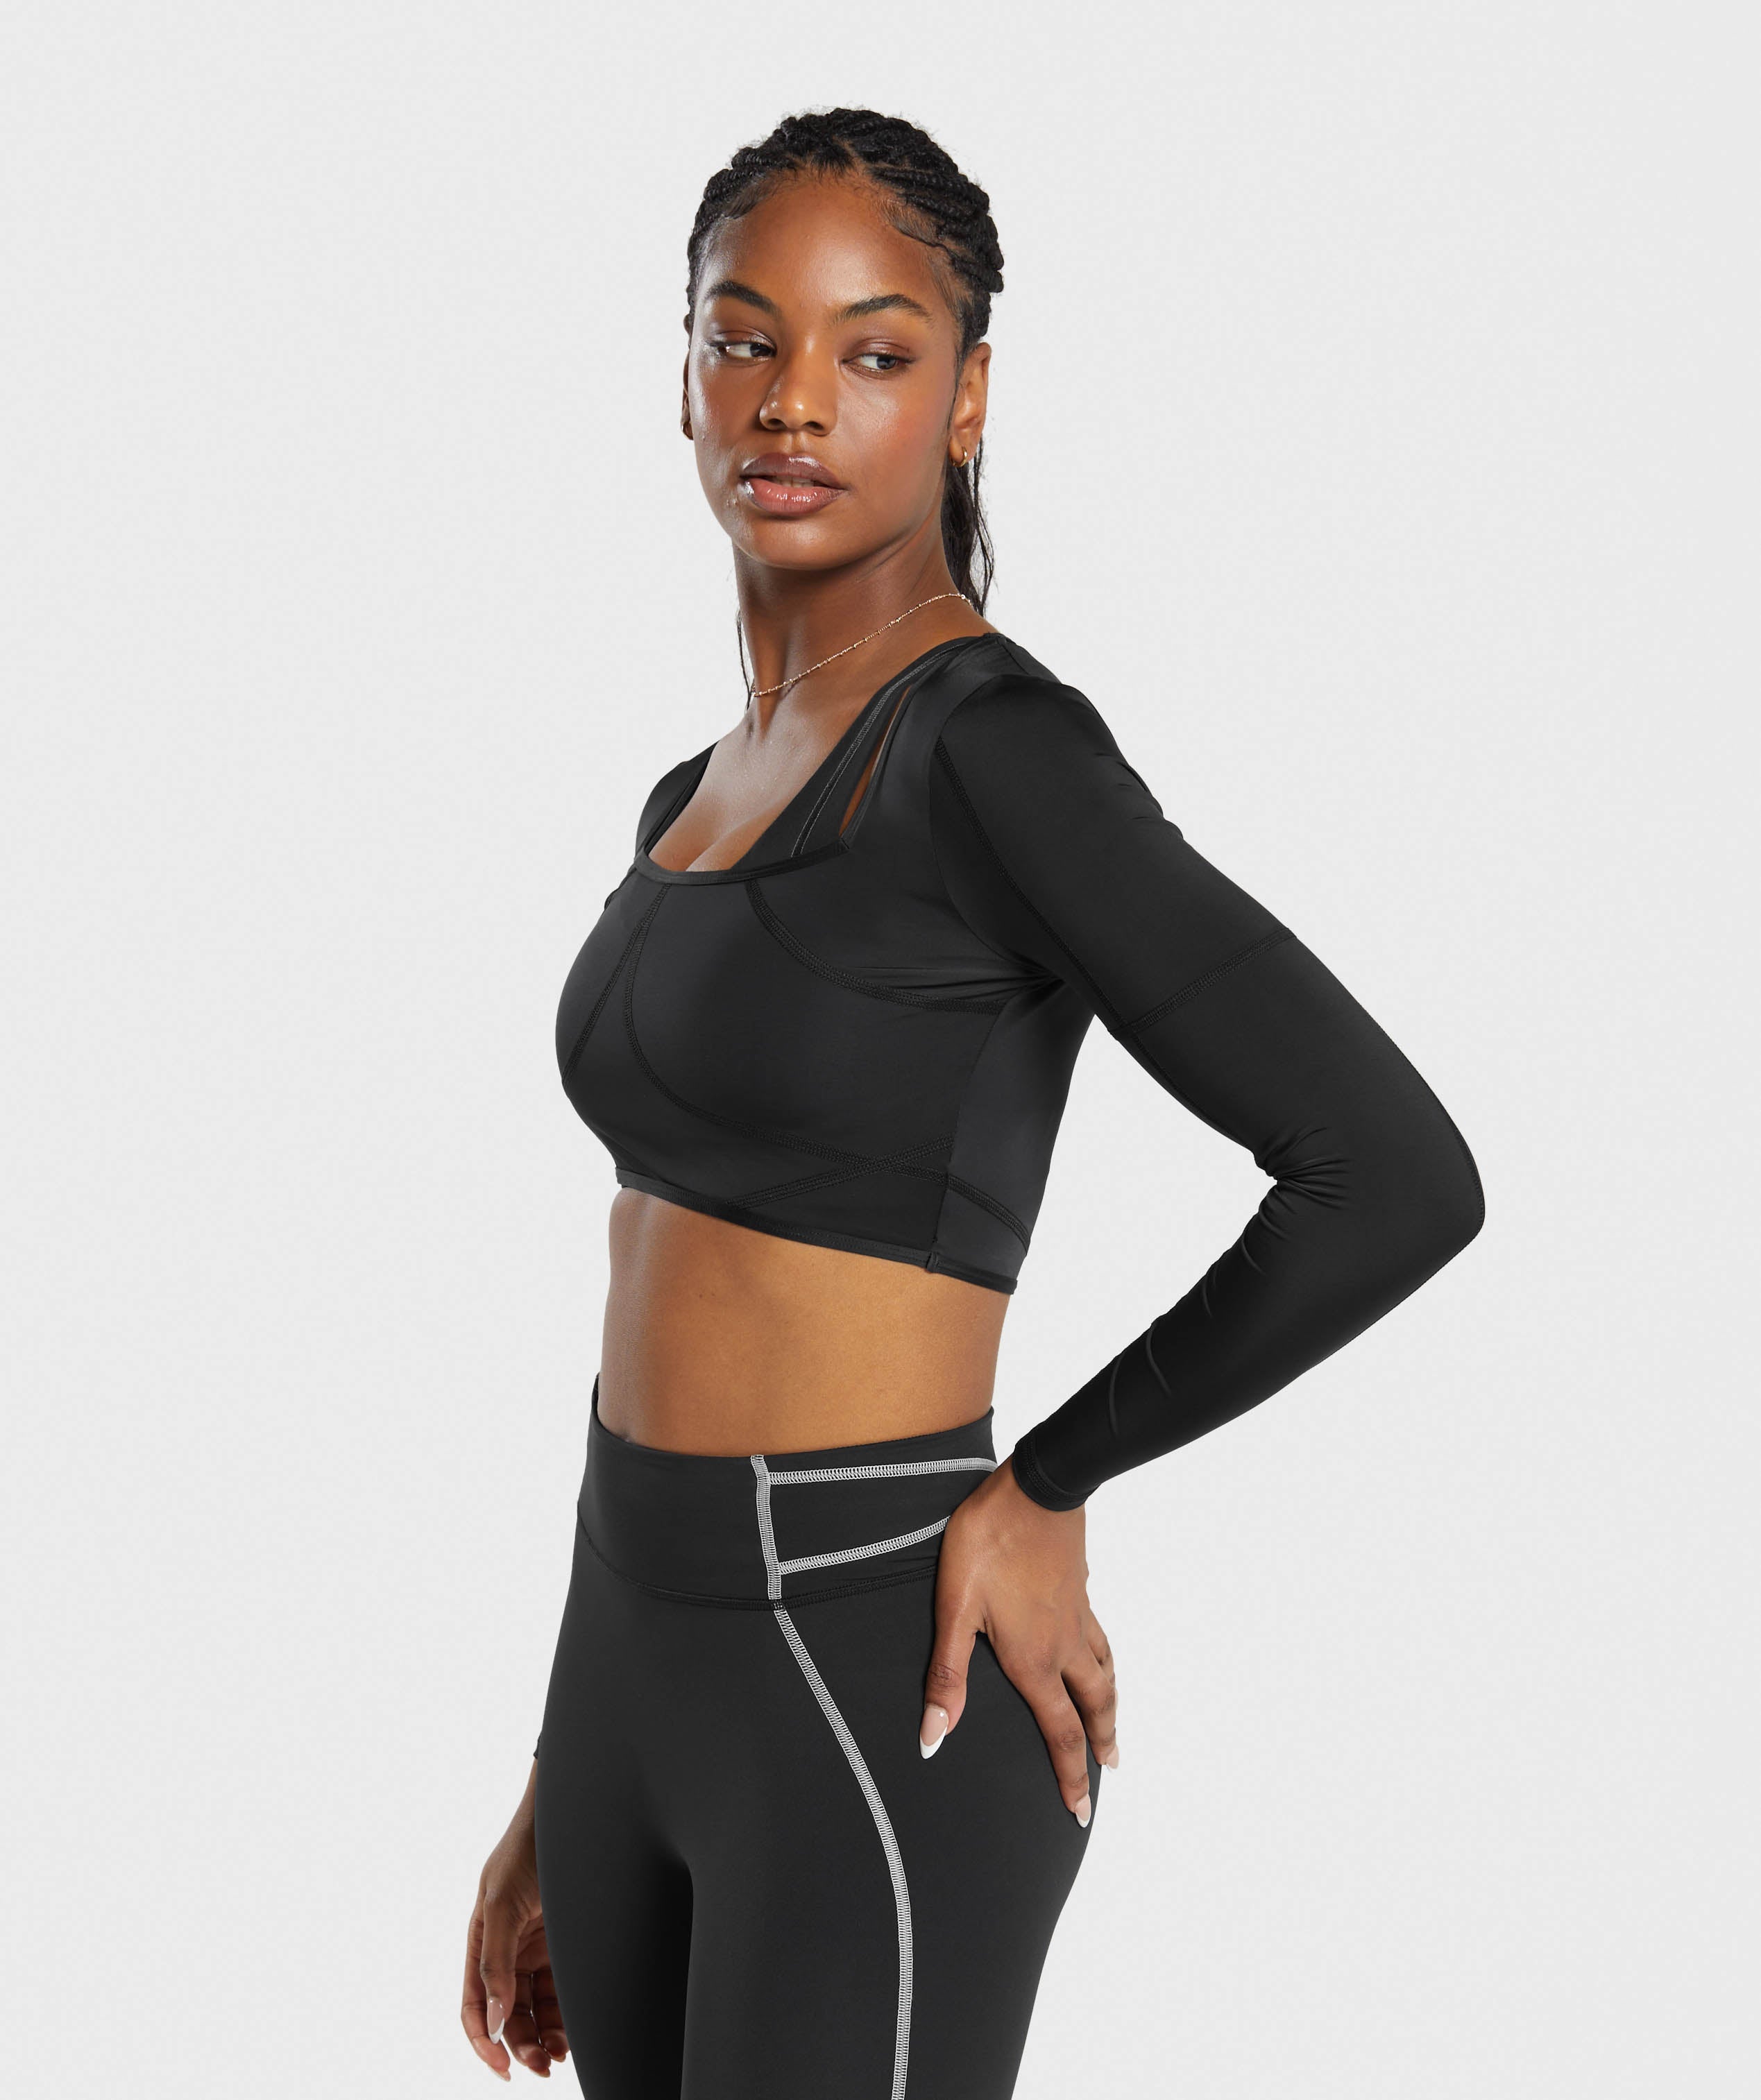 Stitch Feature Long Sleeve Crop Top in Black/Stock Black Marl - view 3